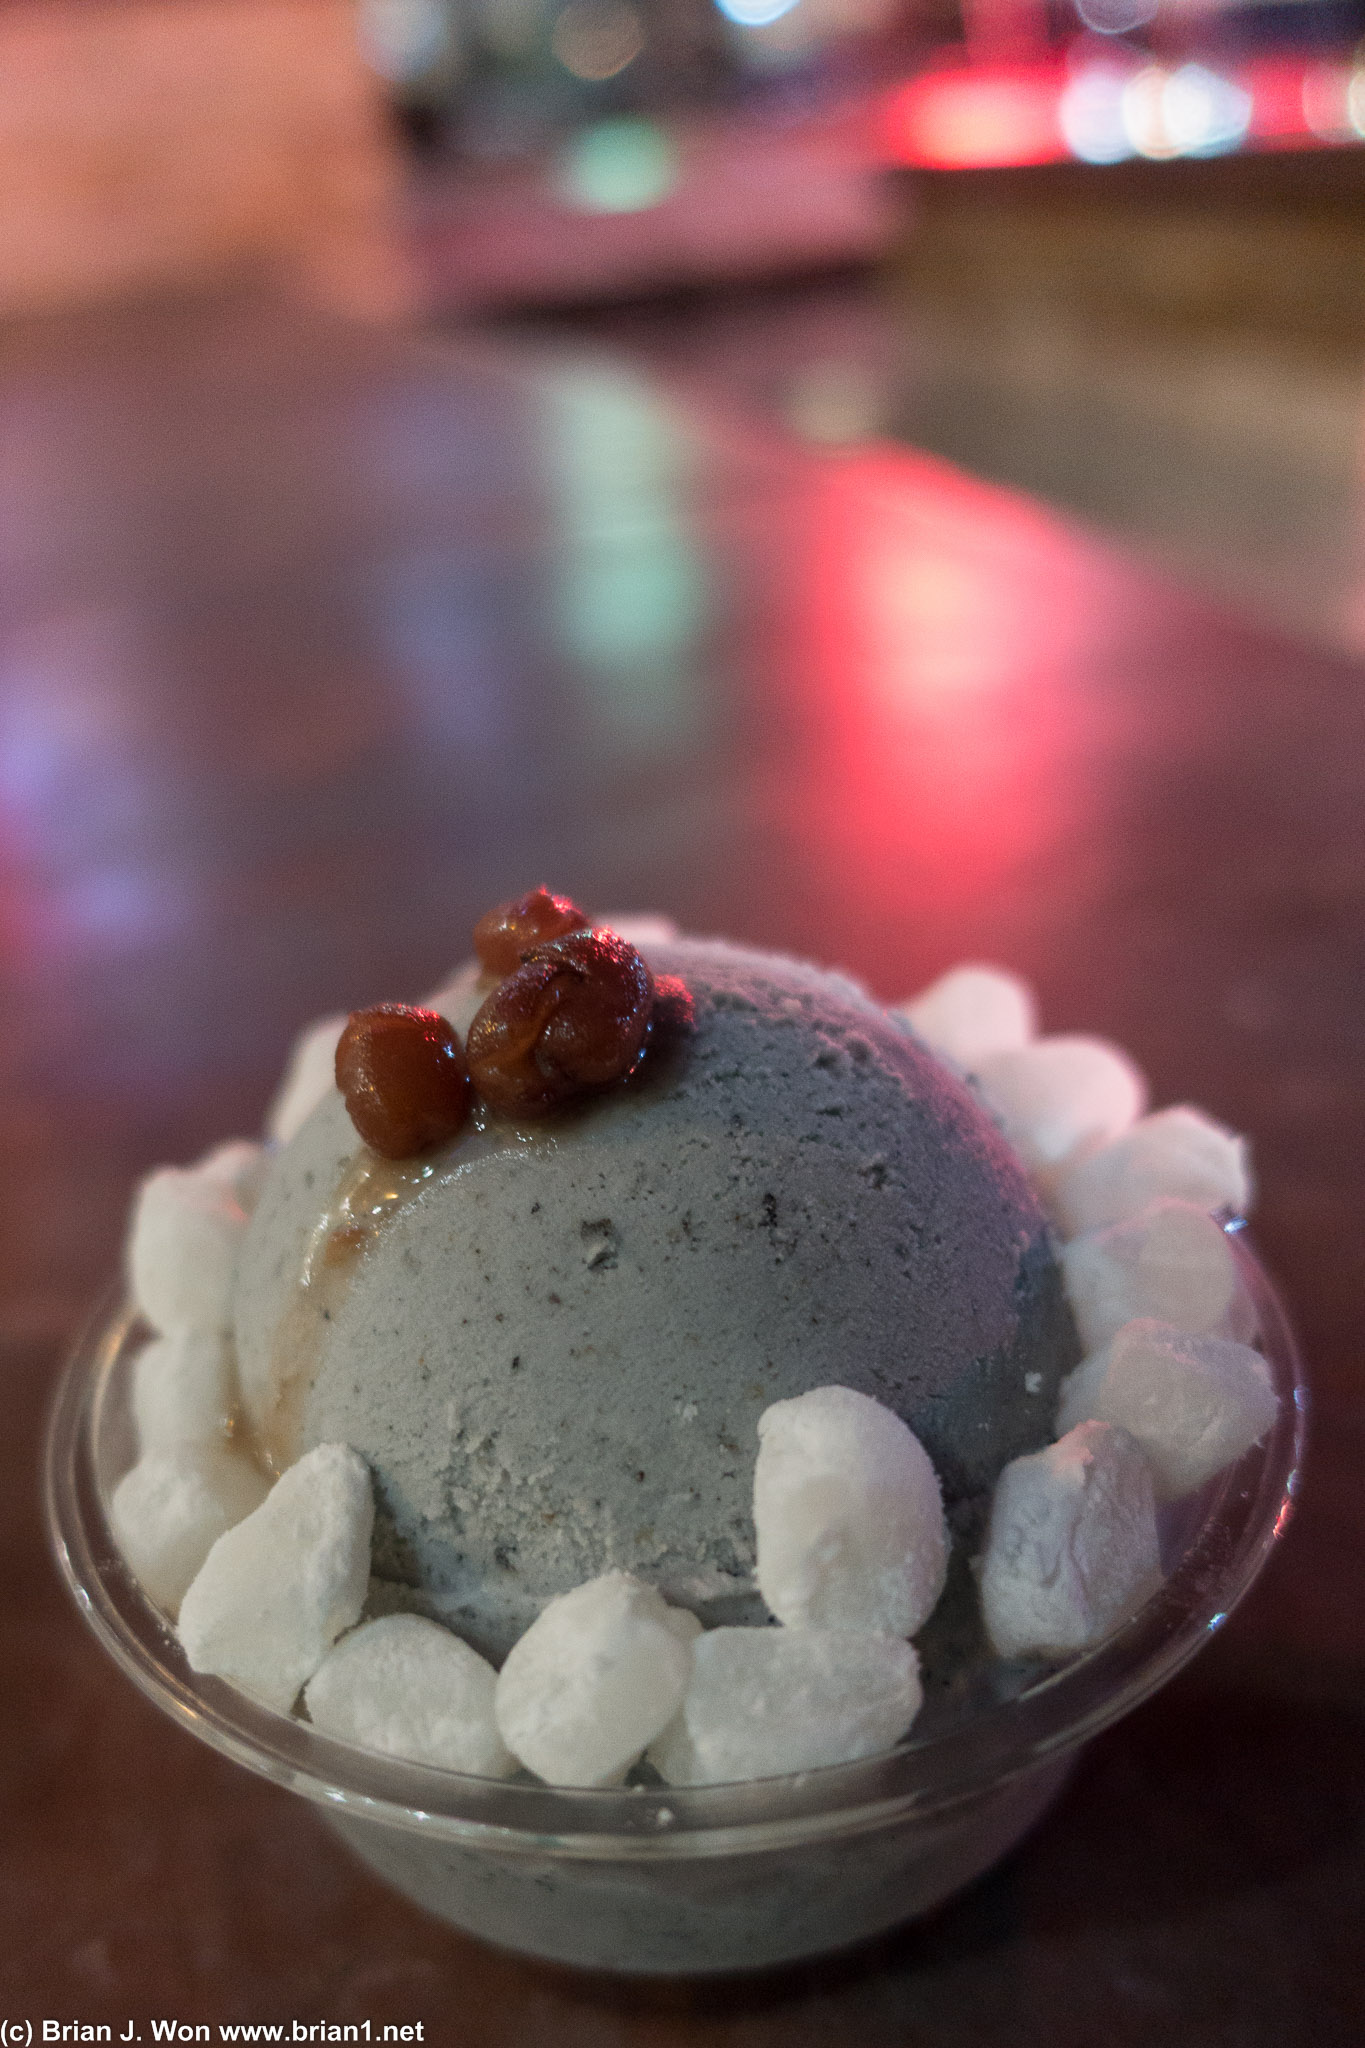 Settled for a black sesame sundae as the wait for rolls was crazy. A little too sweet but not bad.